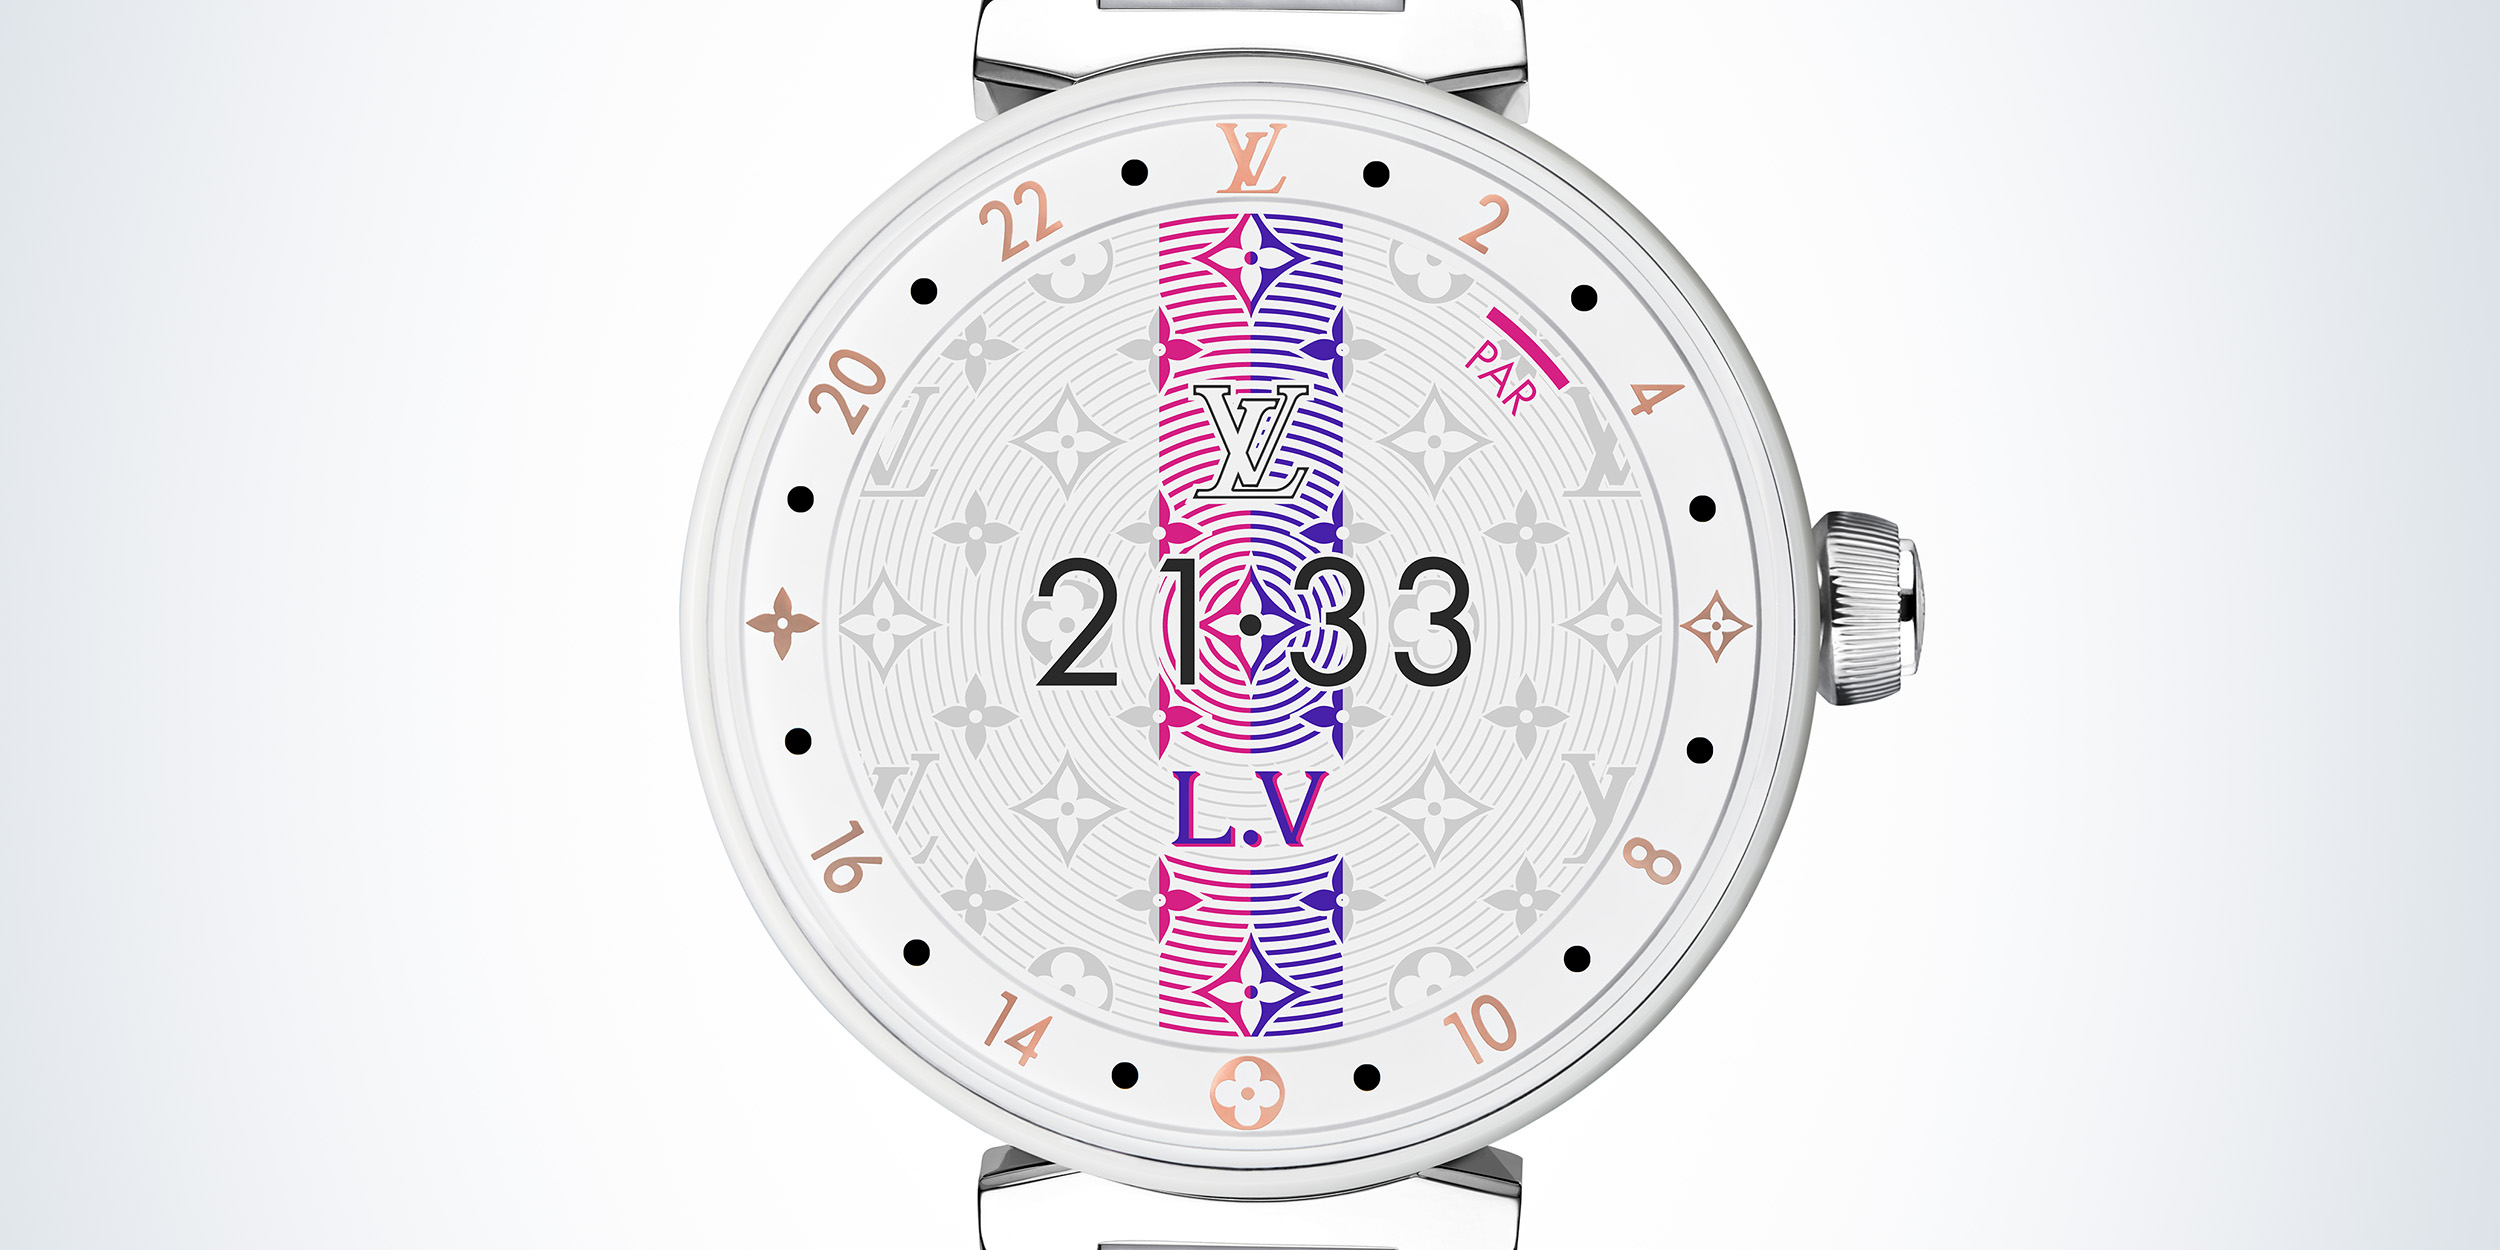 Louis Vuitton Tambour Horizon Light Up announced with a Snapdragon Wear  4100 SoC but no Wear OS -  News